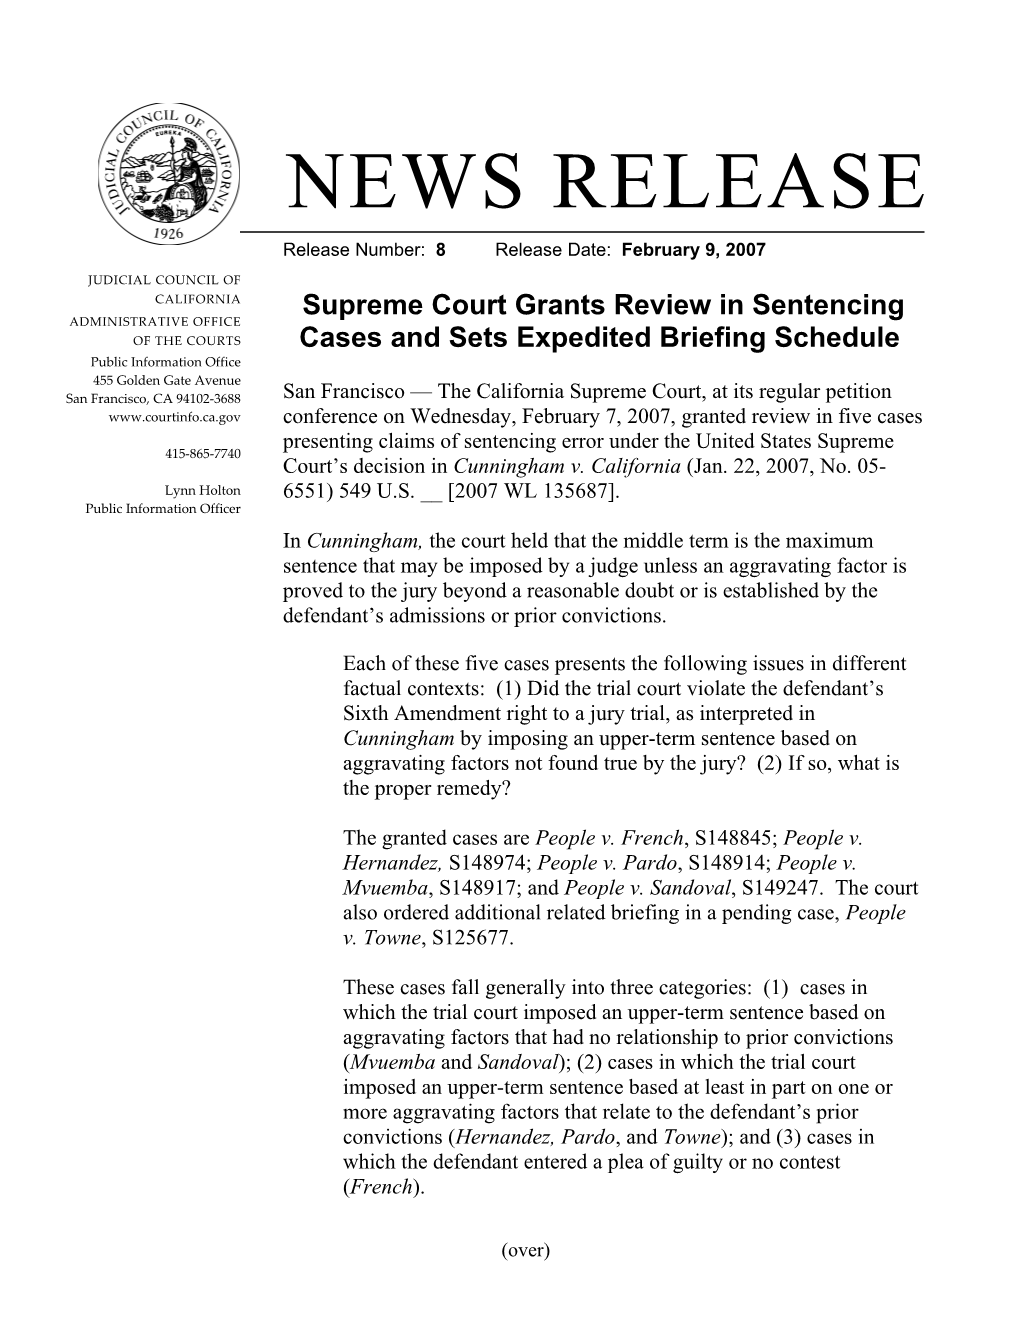 Supreme Court Grants Review in Sentencing Cases and Sets Expedited Briefing Schedule